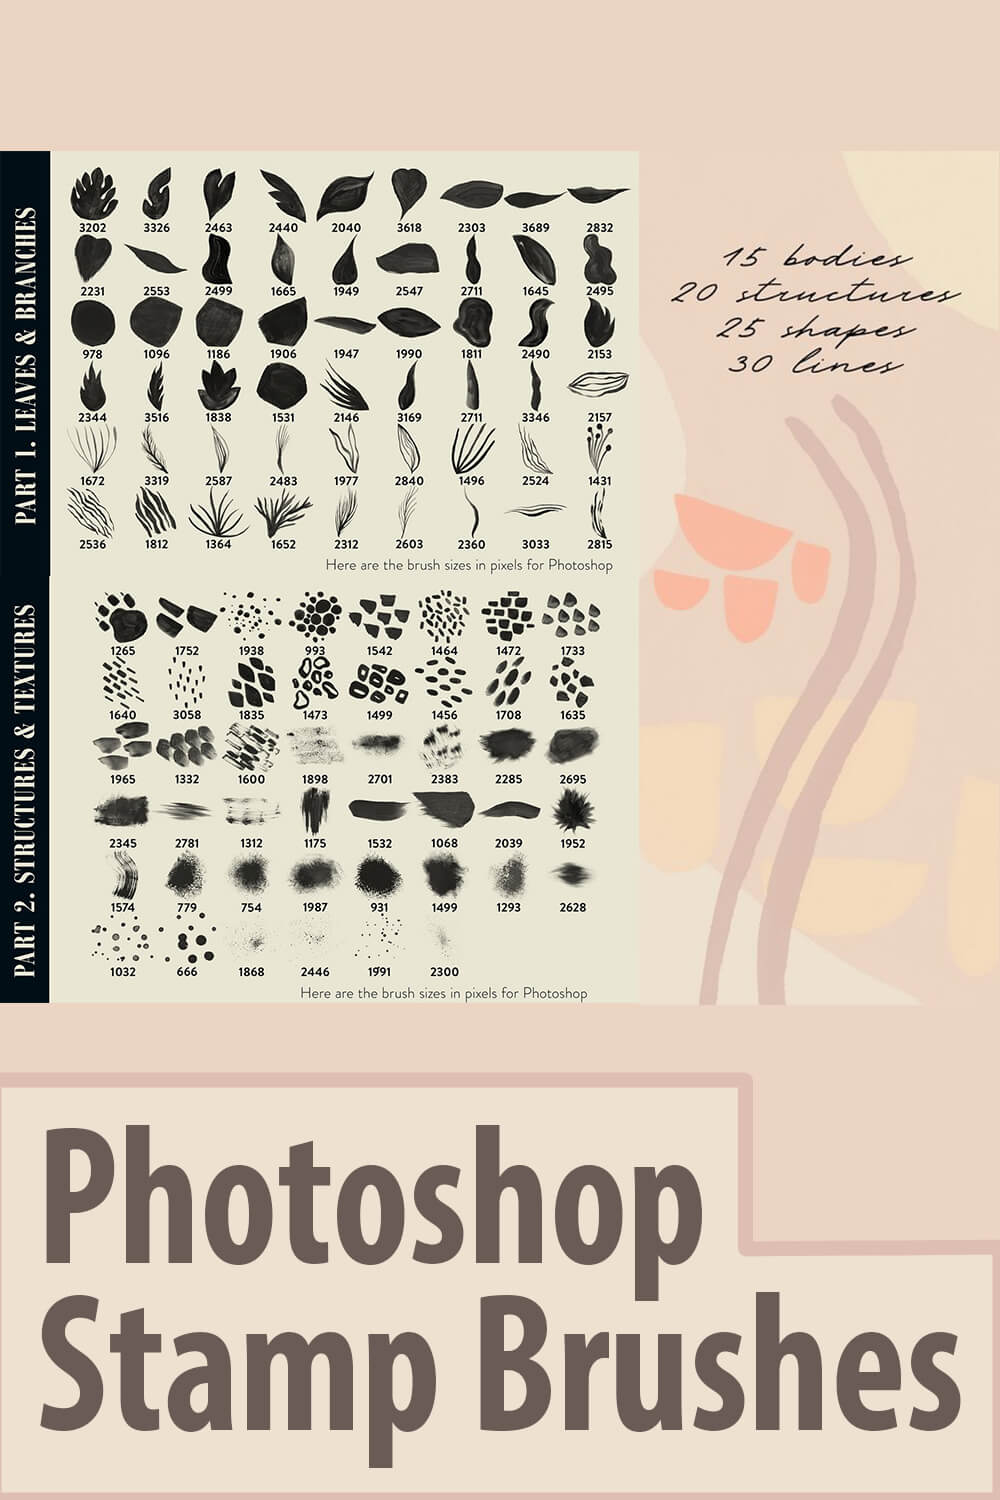 All Photoshop Stamp Brushes.